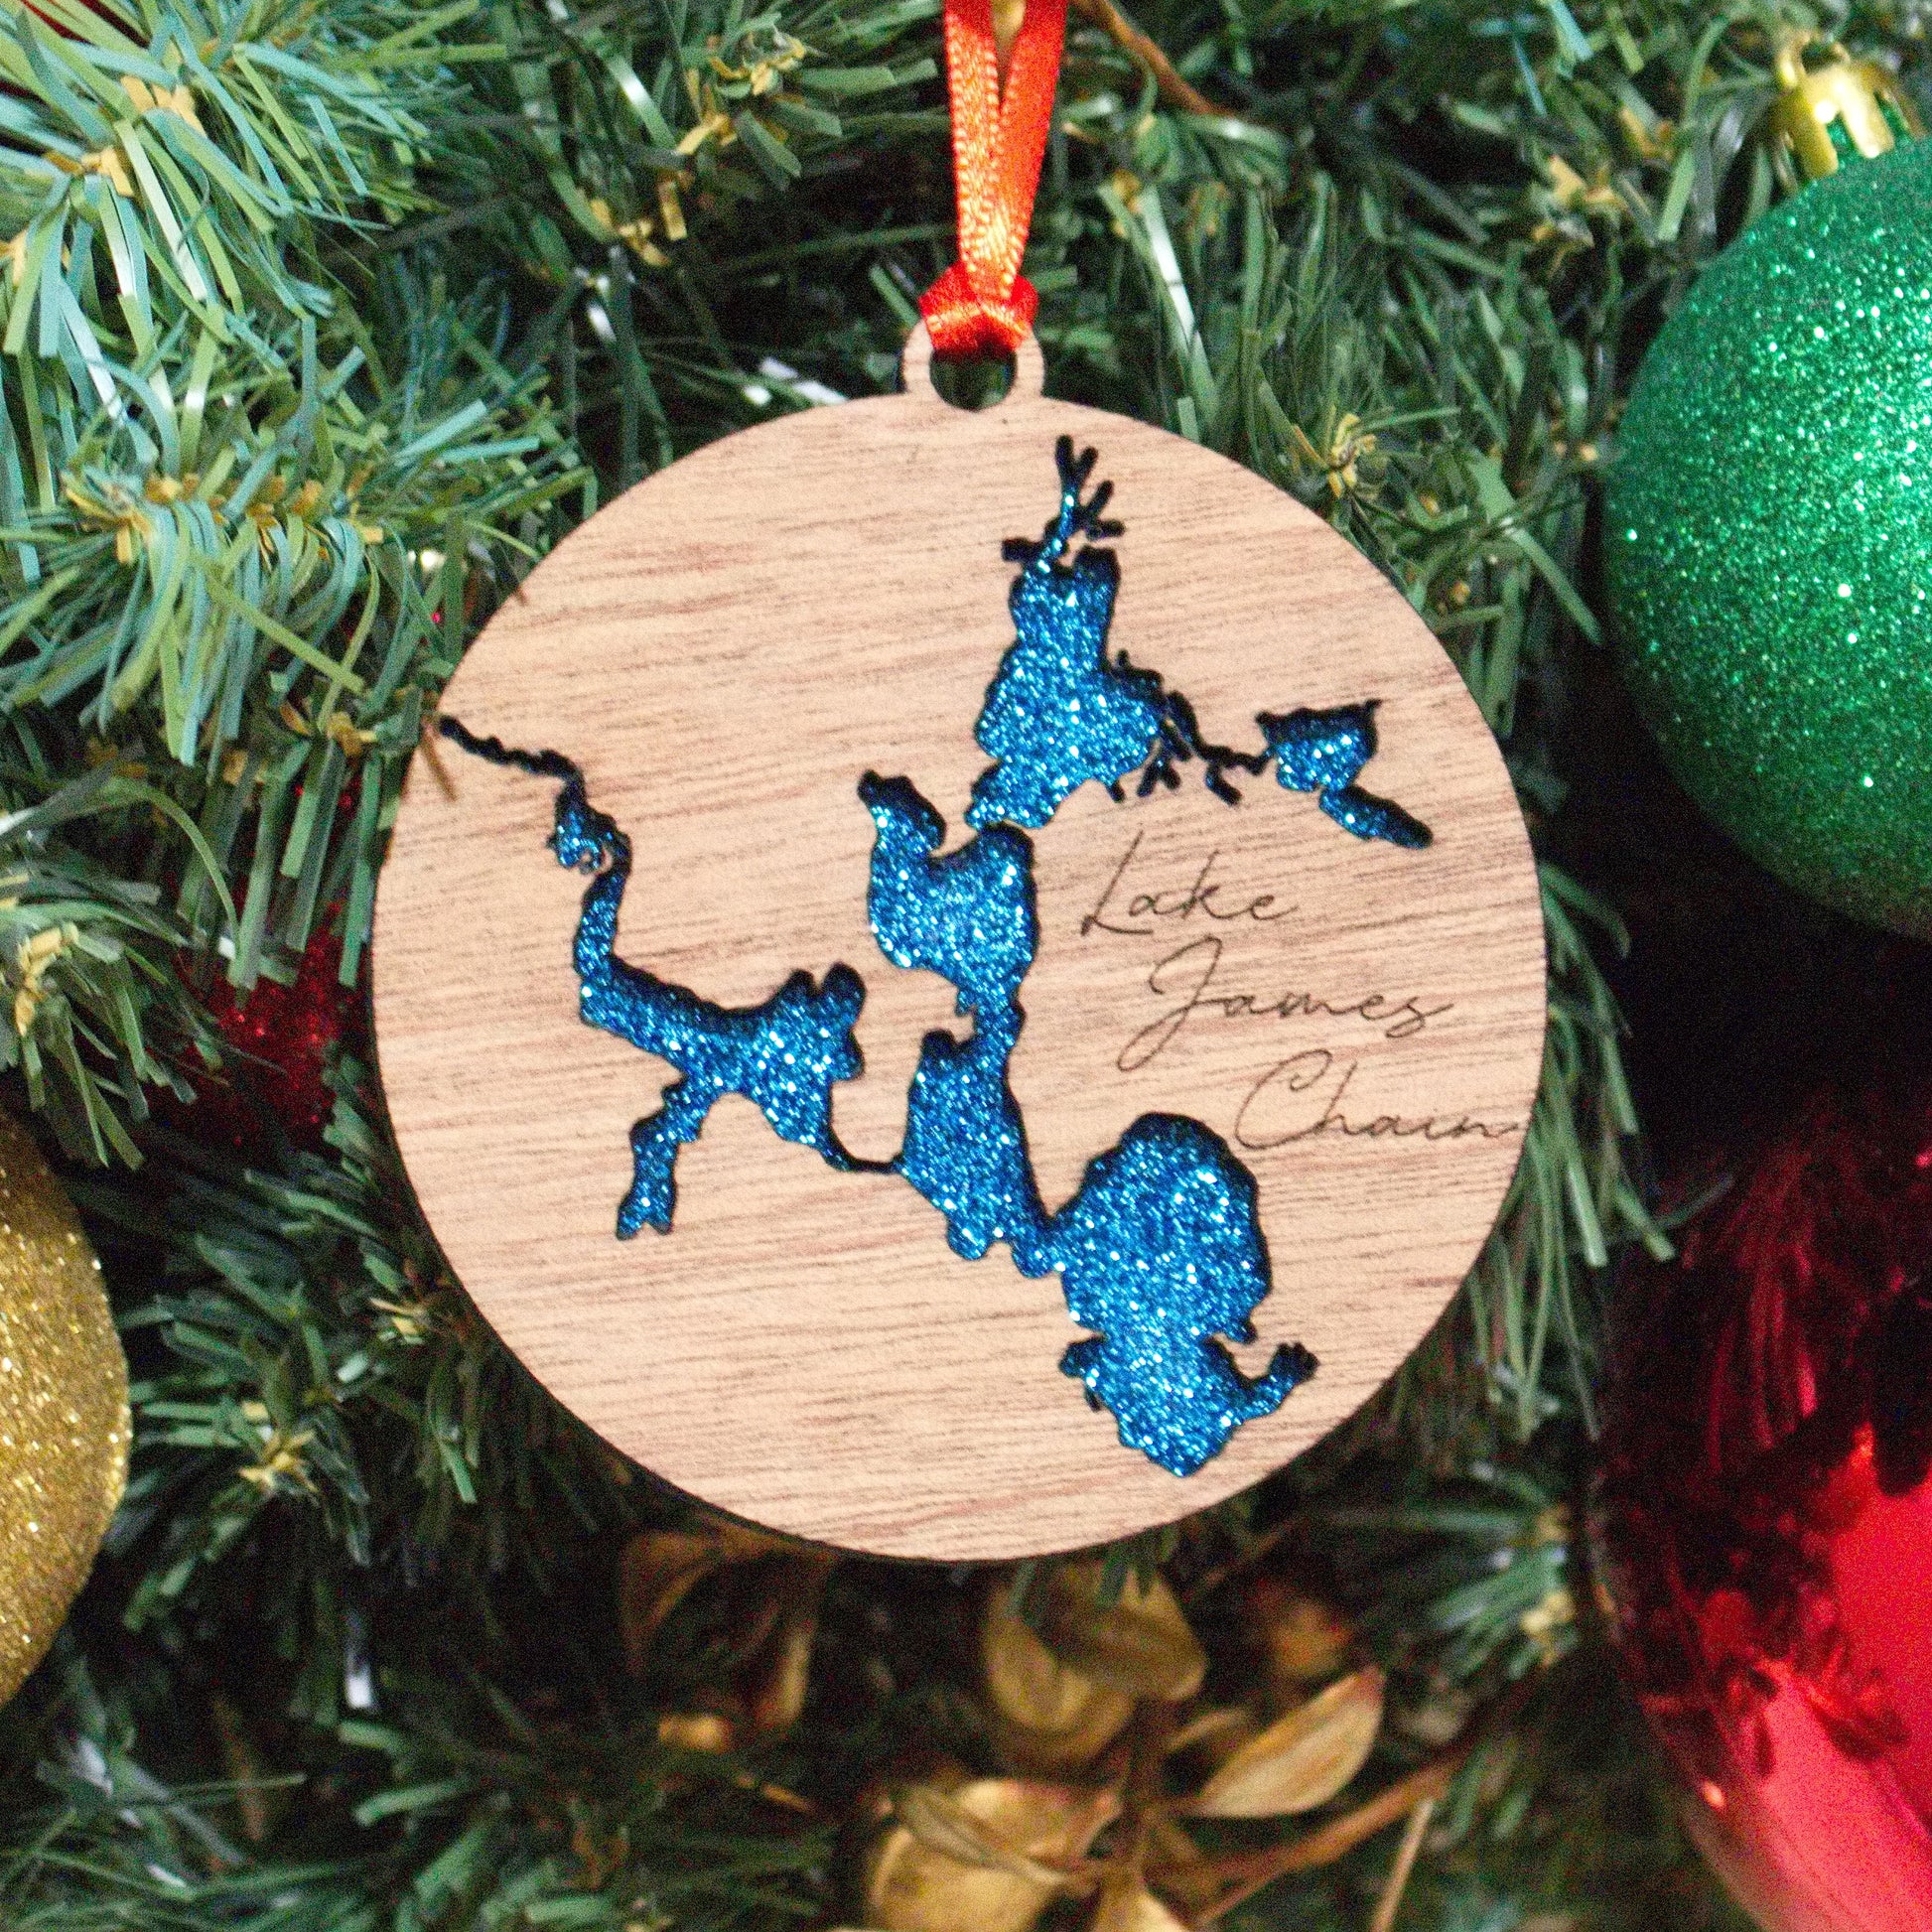 Lake James Chain Christmas ornament for the family to remember time spent together on the lake. Made out of wood and acrylic with attention to detail. This is something you will love.